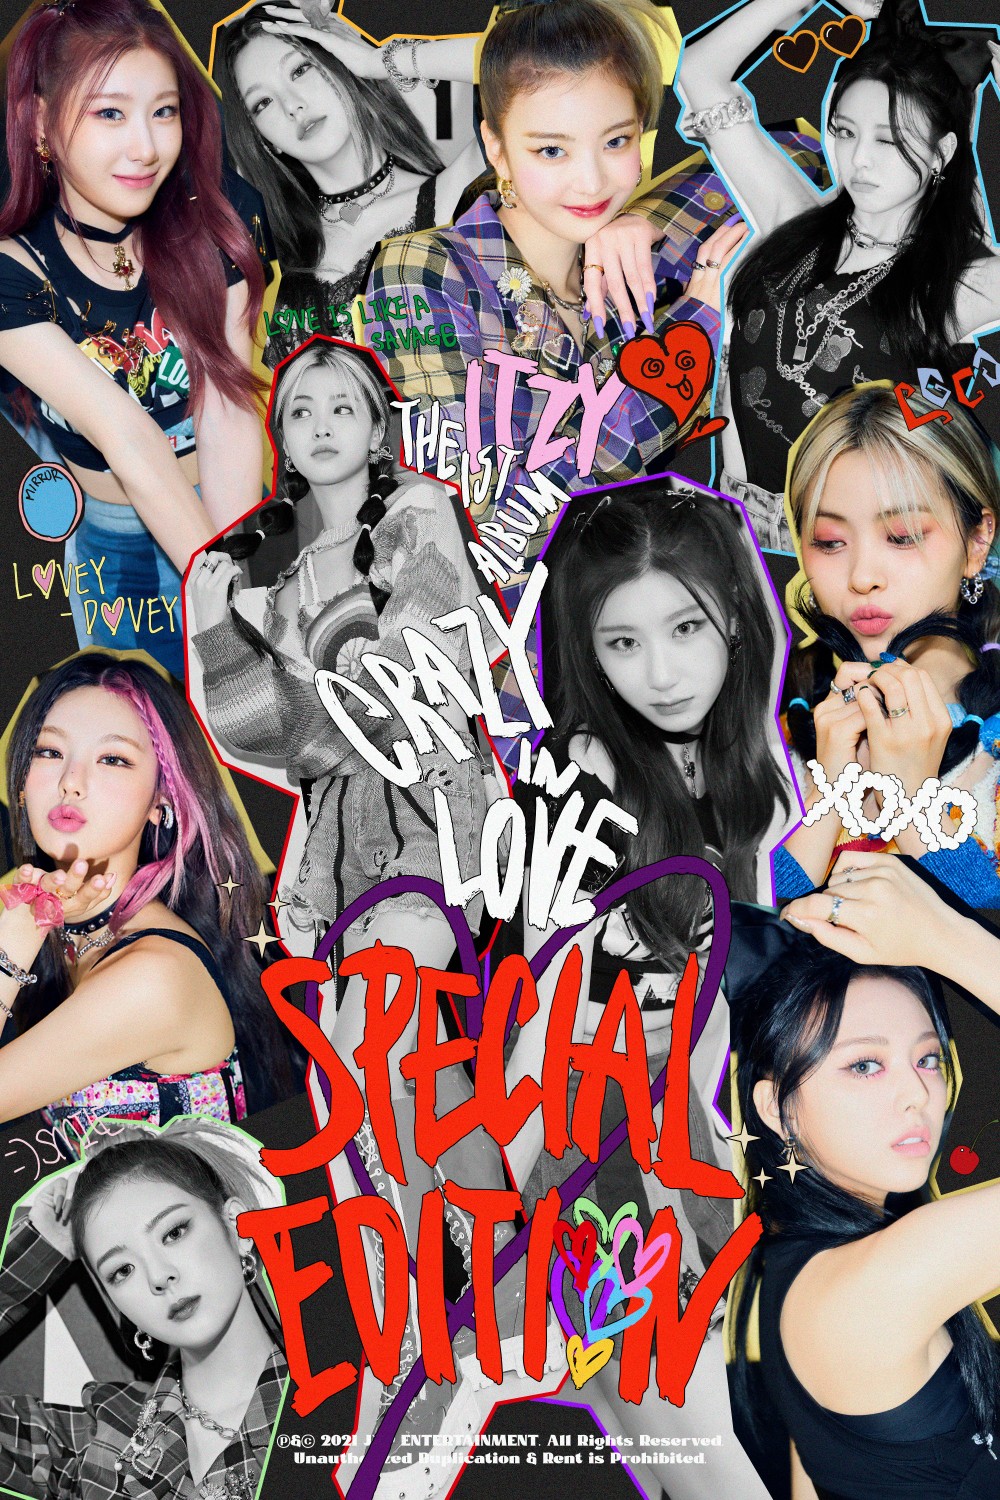 ITZY Crazy In Love Teaser (Photobook Preview ver.) (HD/HQ) - K-Pop Database  /